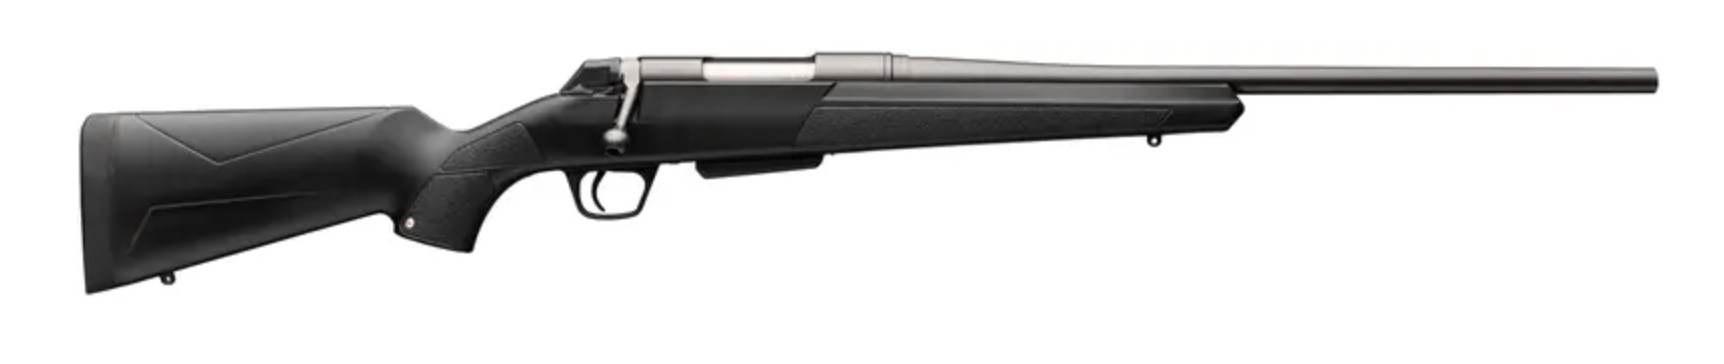 Winchester XPR compact youth hunting rifle